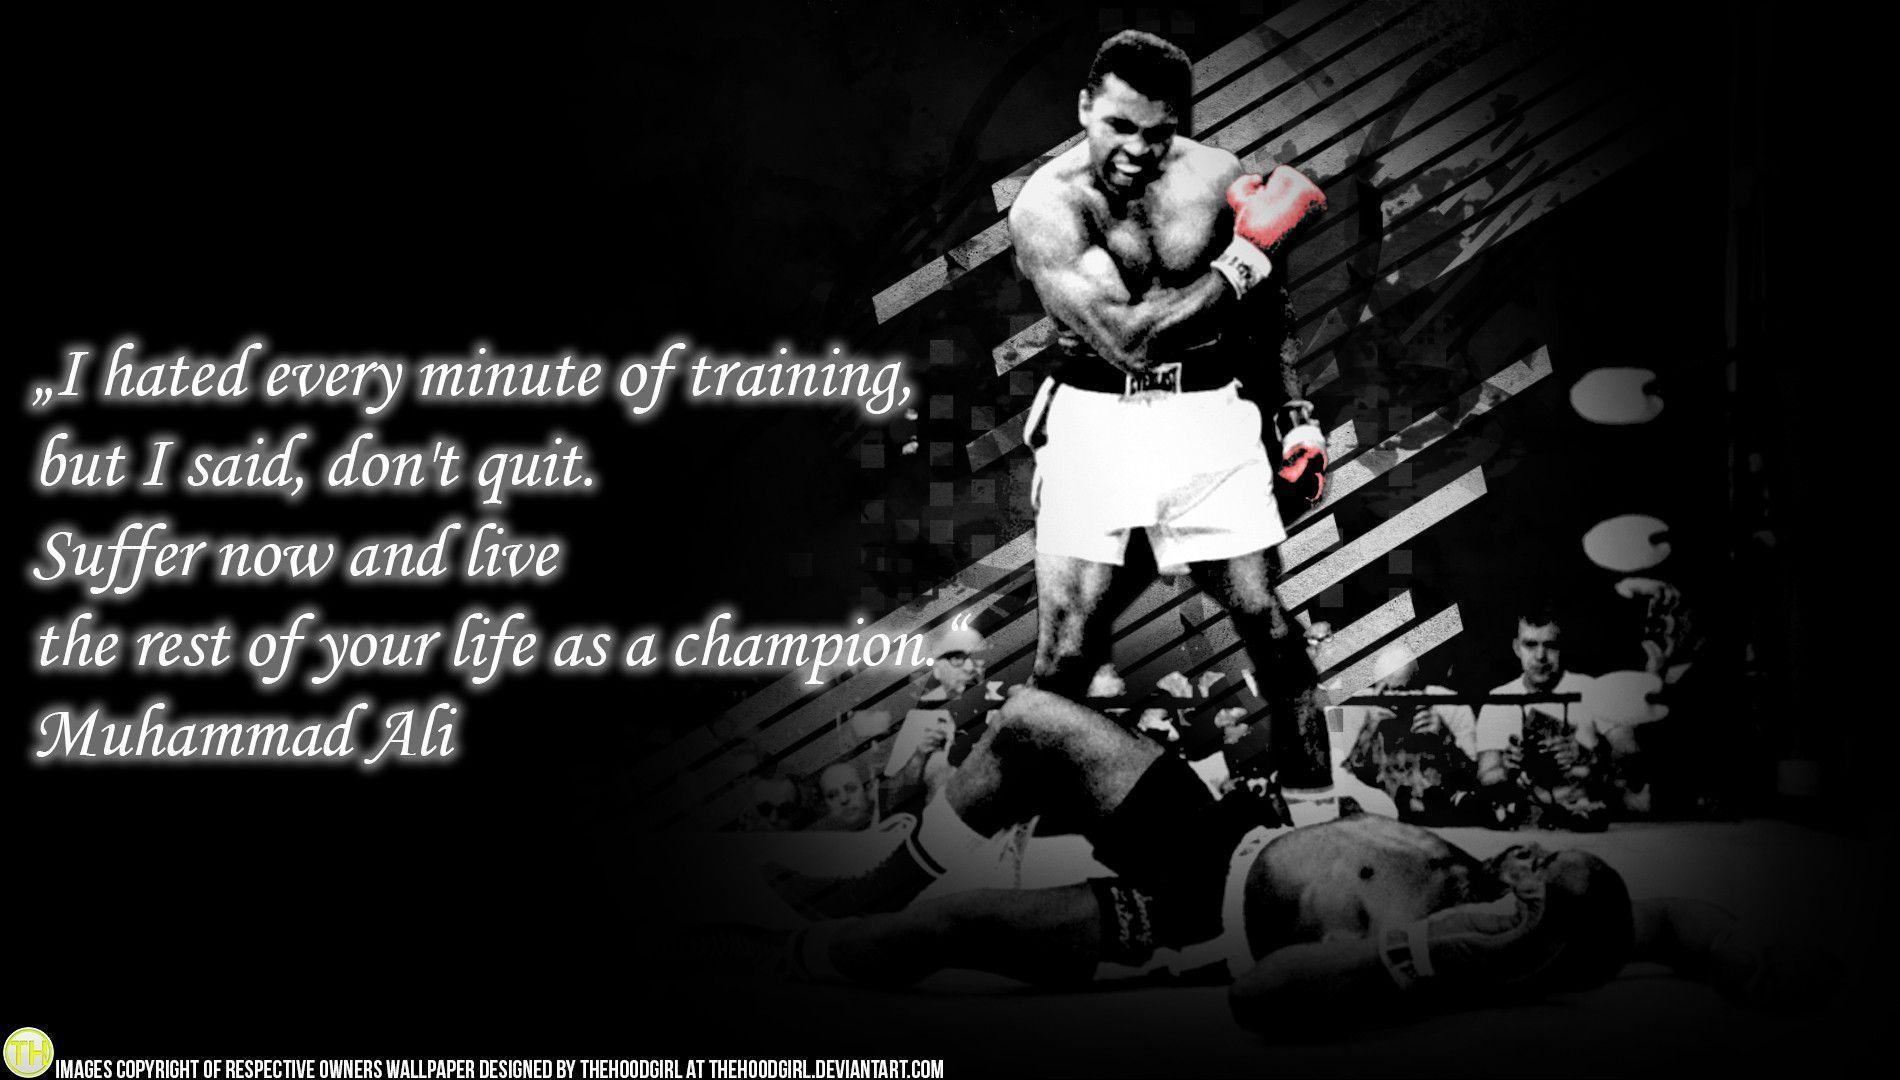 Wallpaper For > Impossible Is Nothing Wallpaper Muhammad Ali